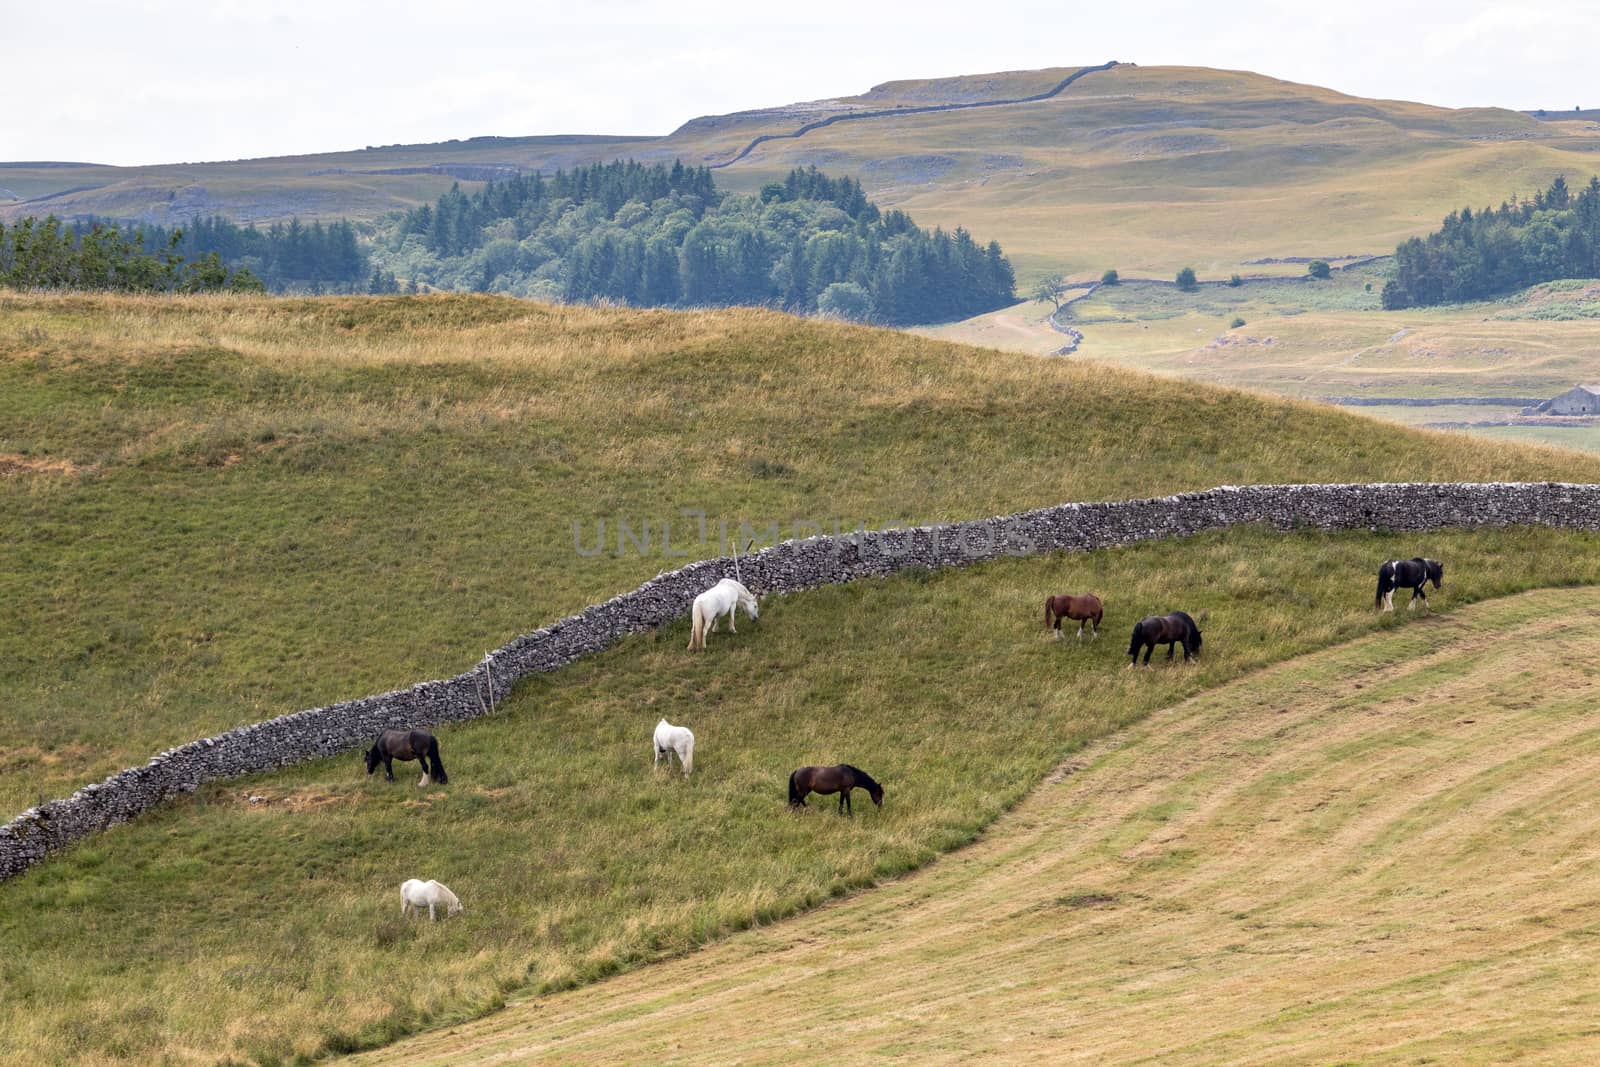 View of horses grazing in the countryside around the village of Conistone in the Yorkshire Dales National Park